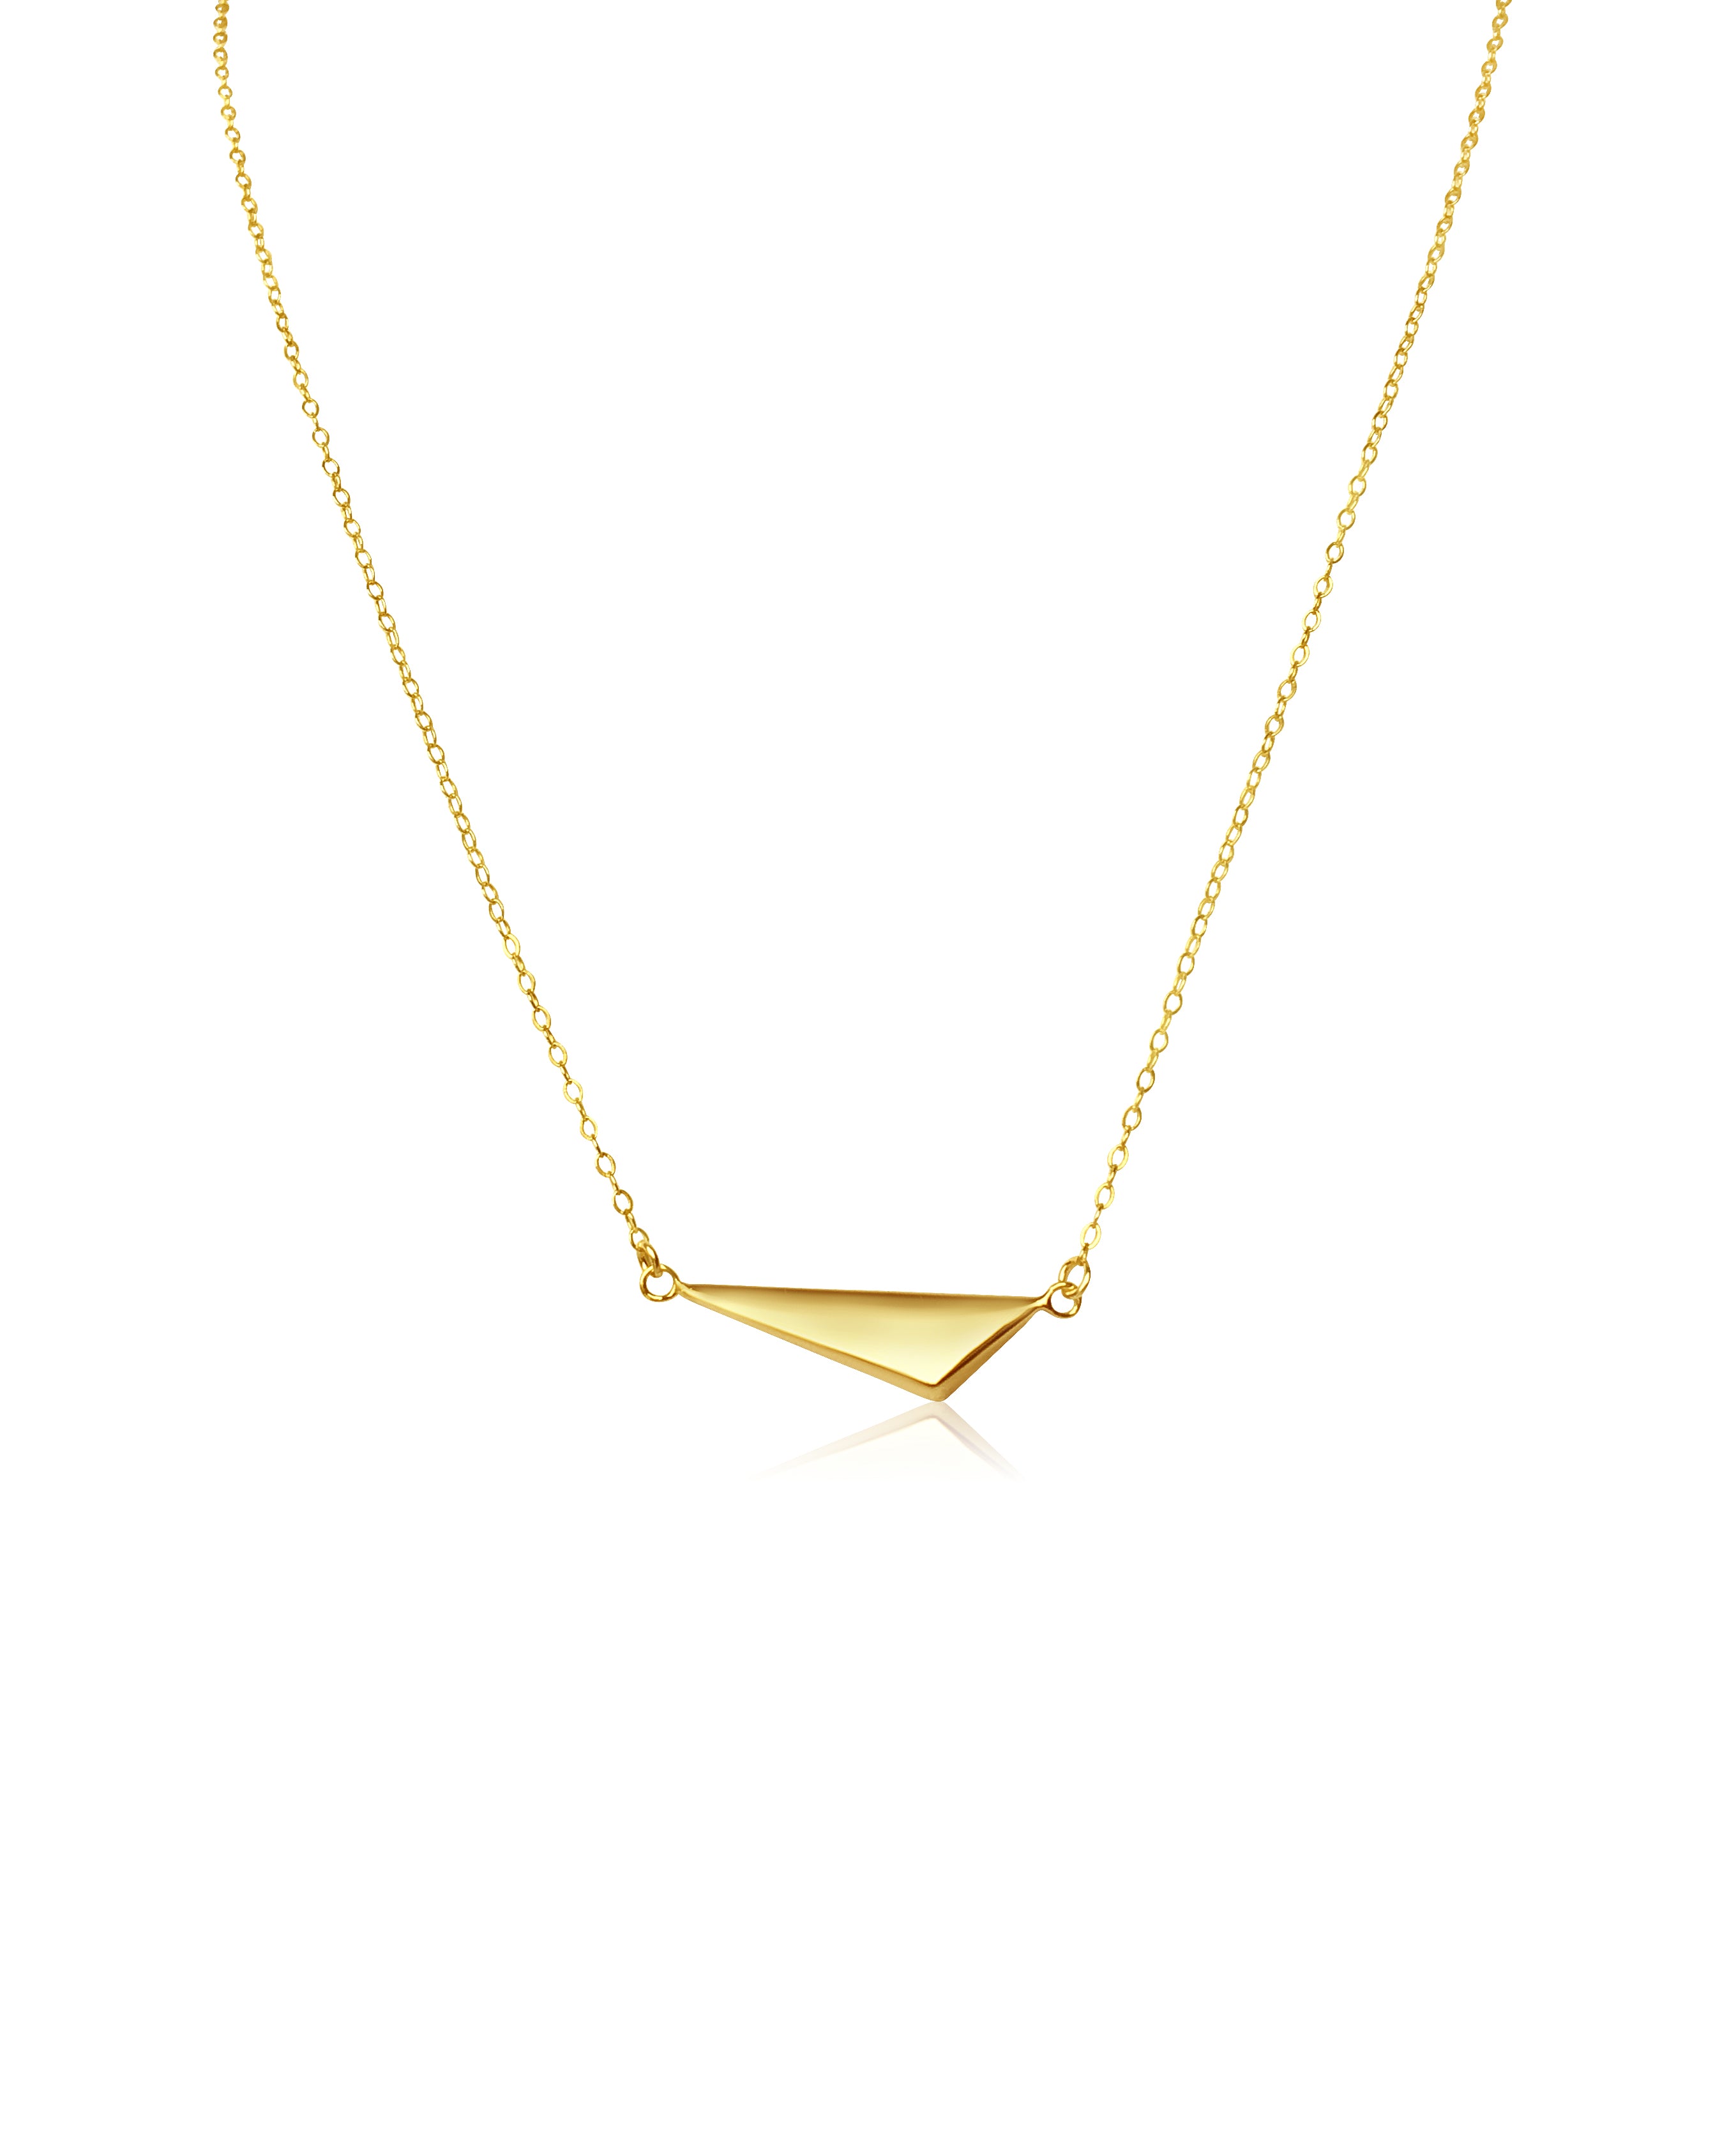 The Penrose Triangle Necklaces – YIN Fine Jewelry